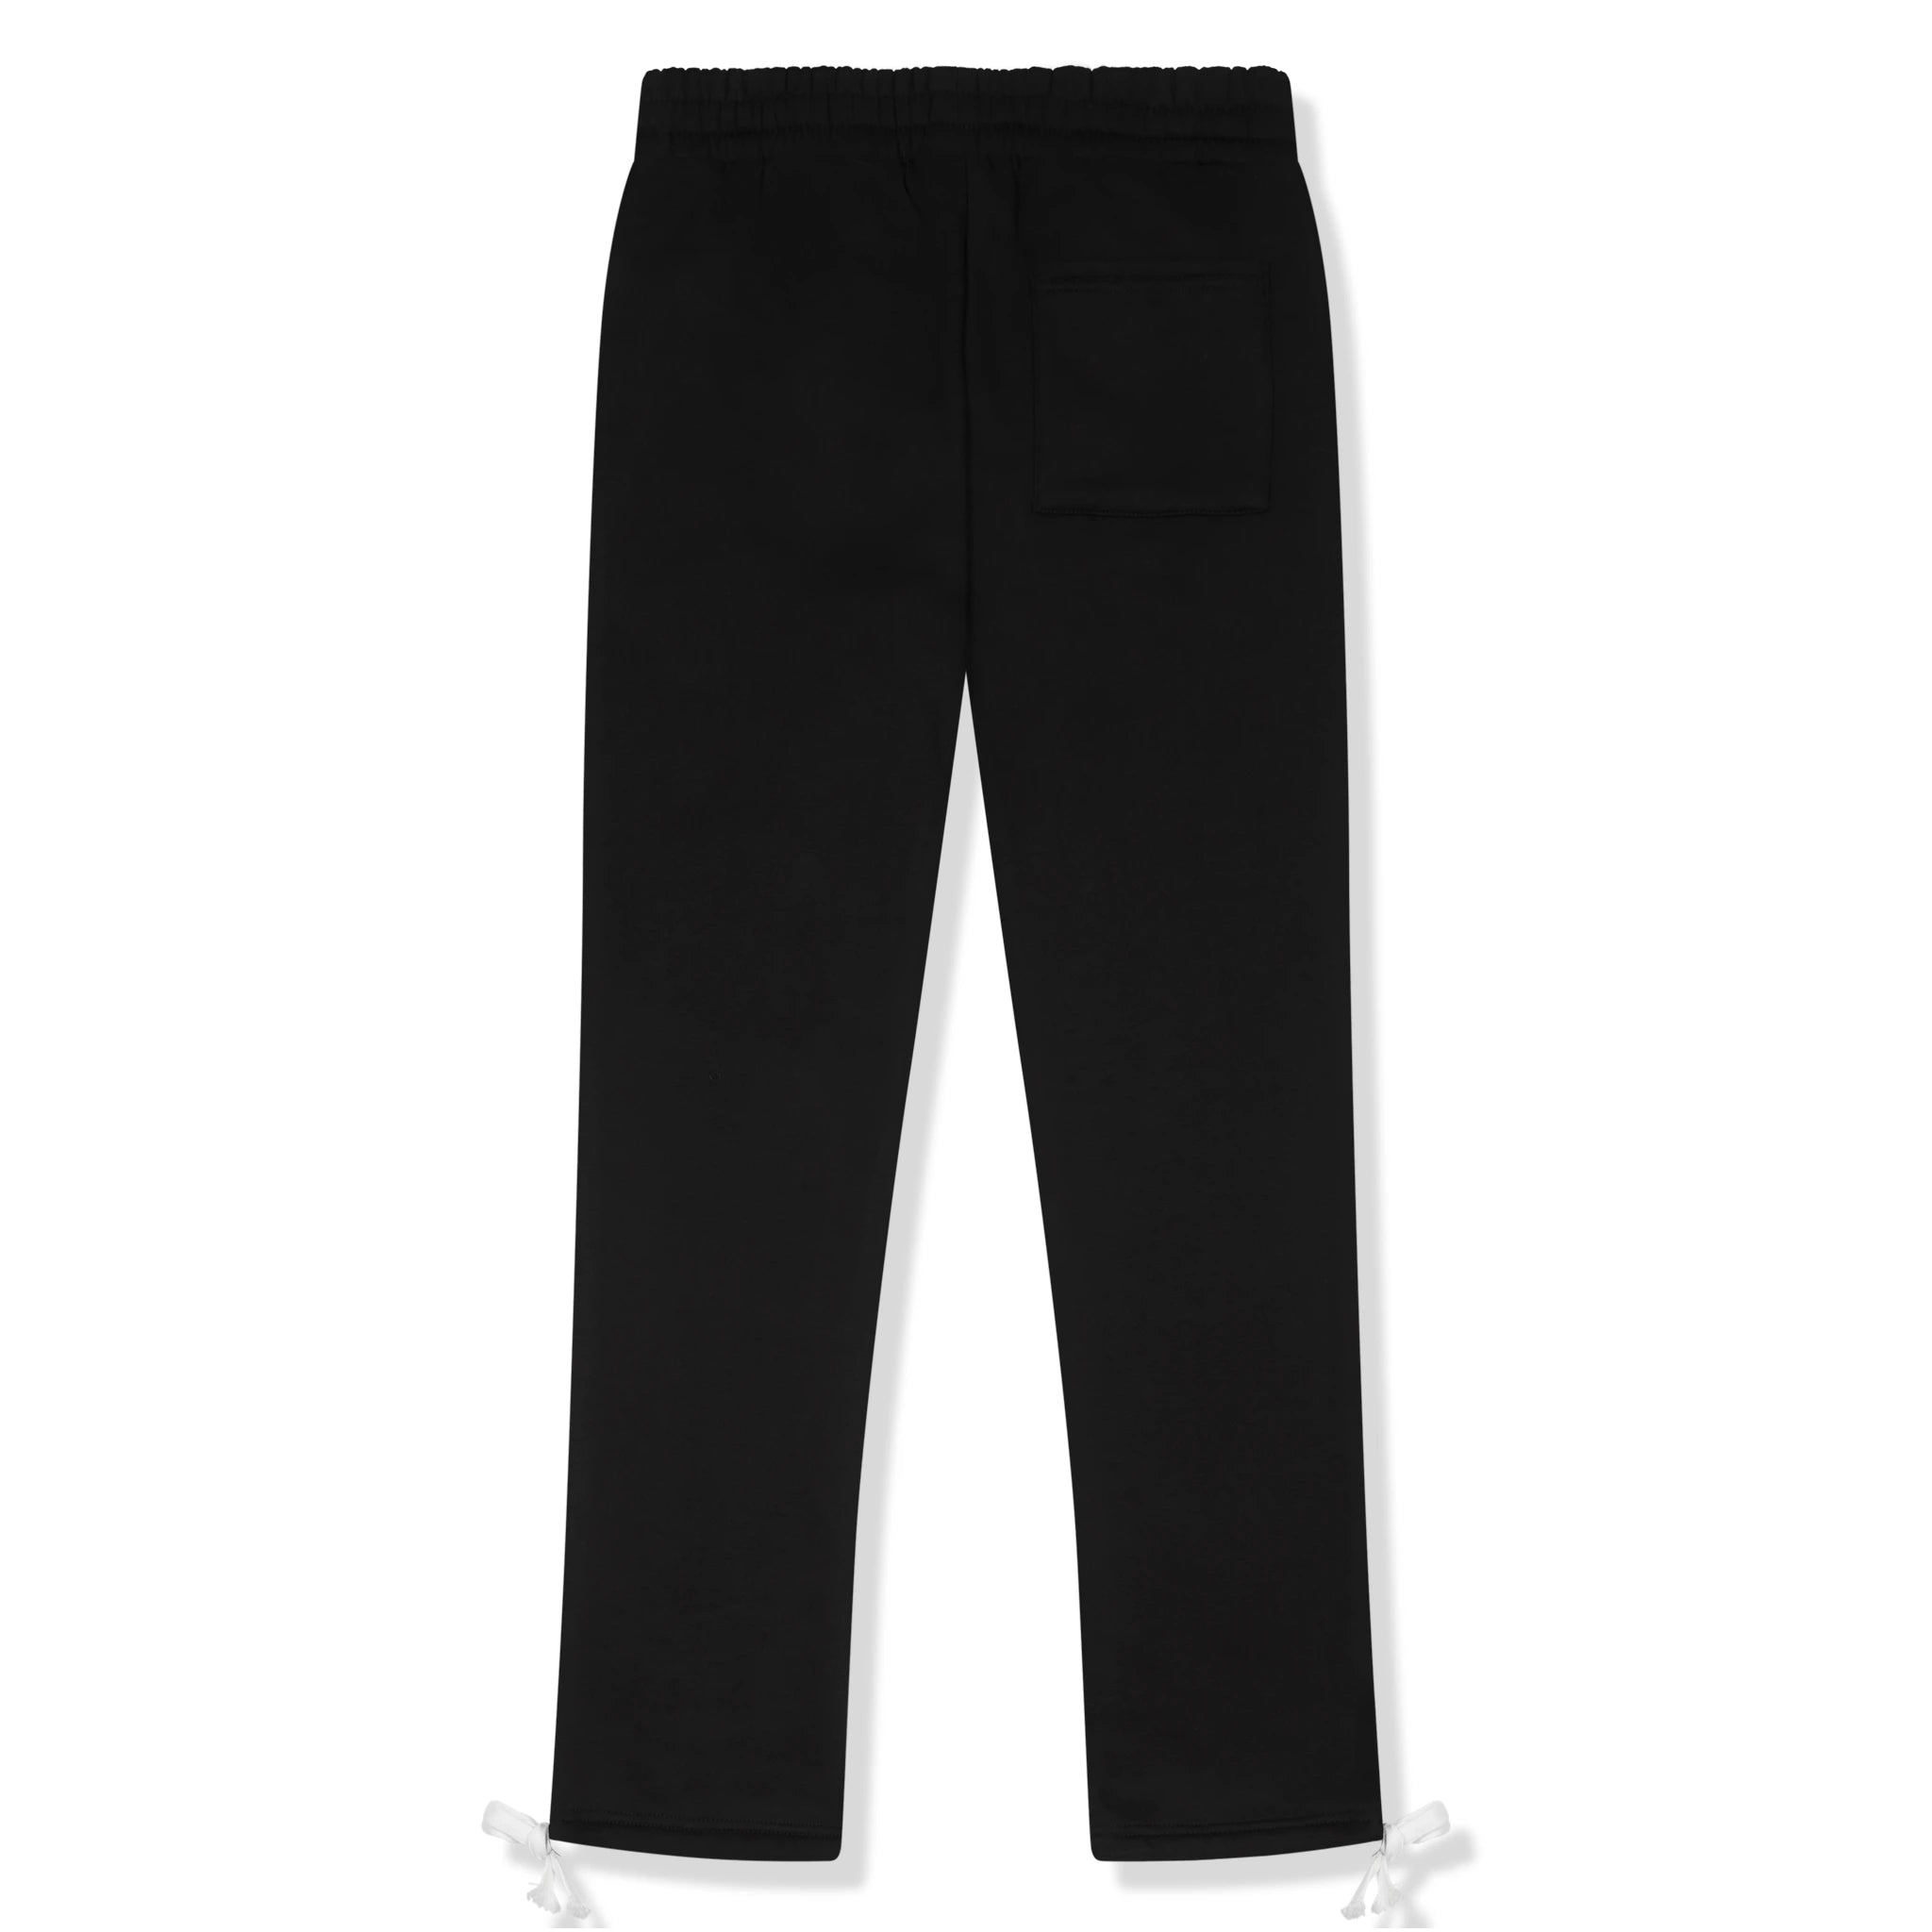 Back view of Carsicko Signature Black Track Pants